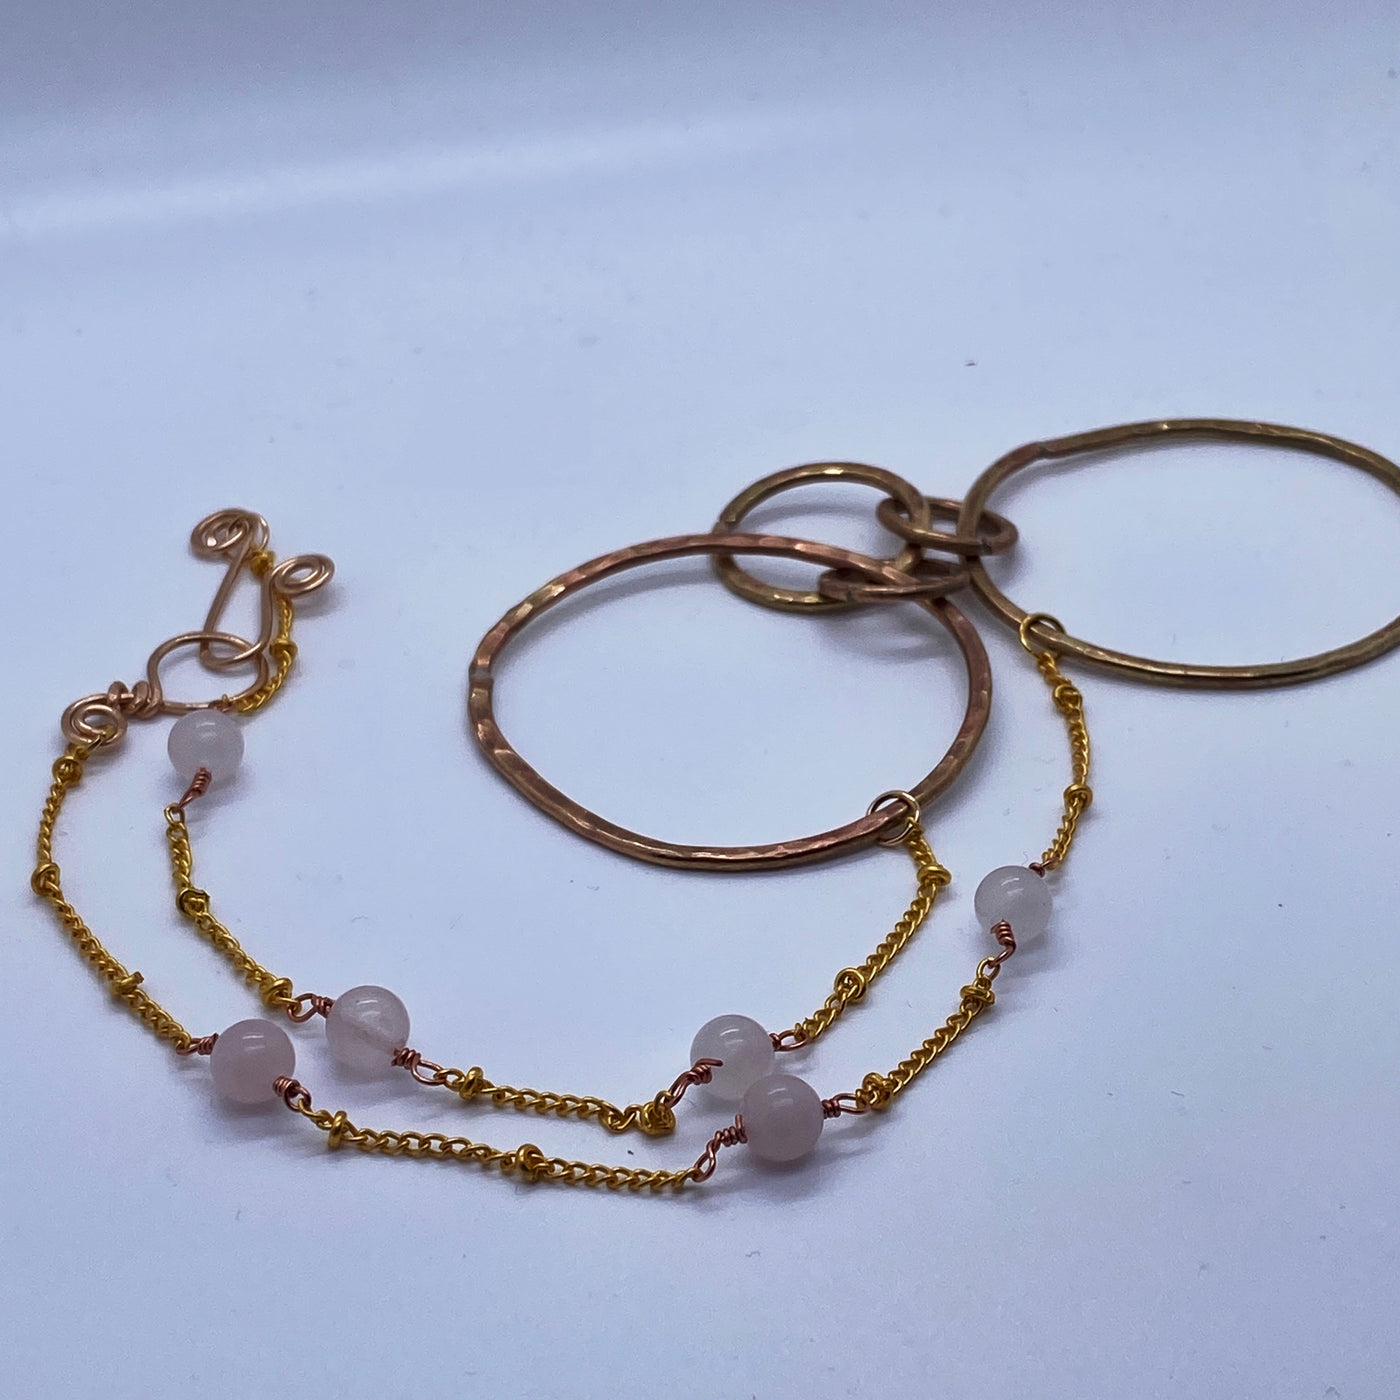 Brass circle texturized necklace on chain with rose quartz